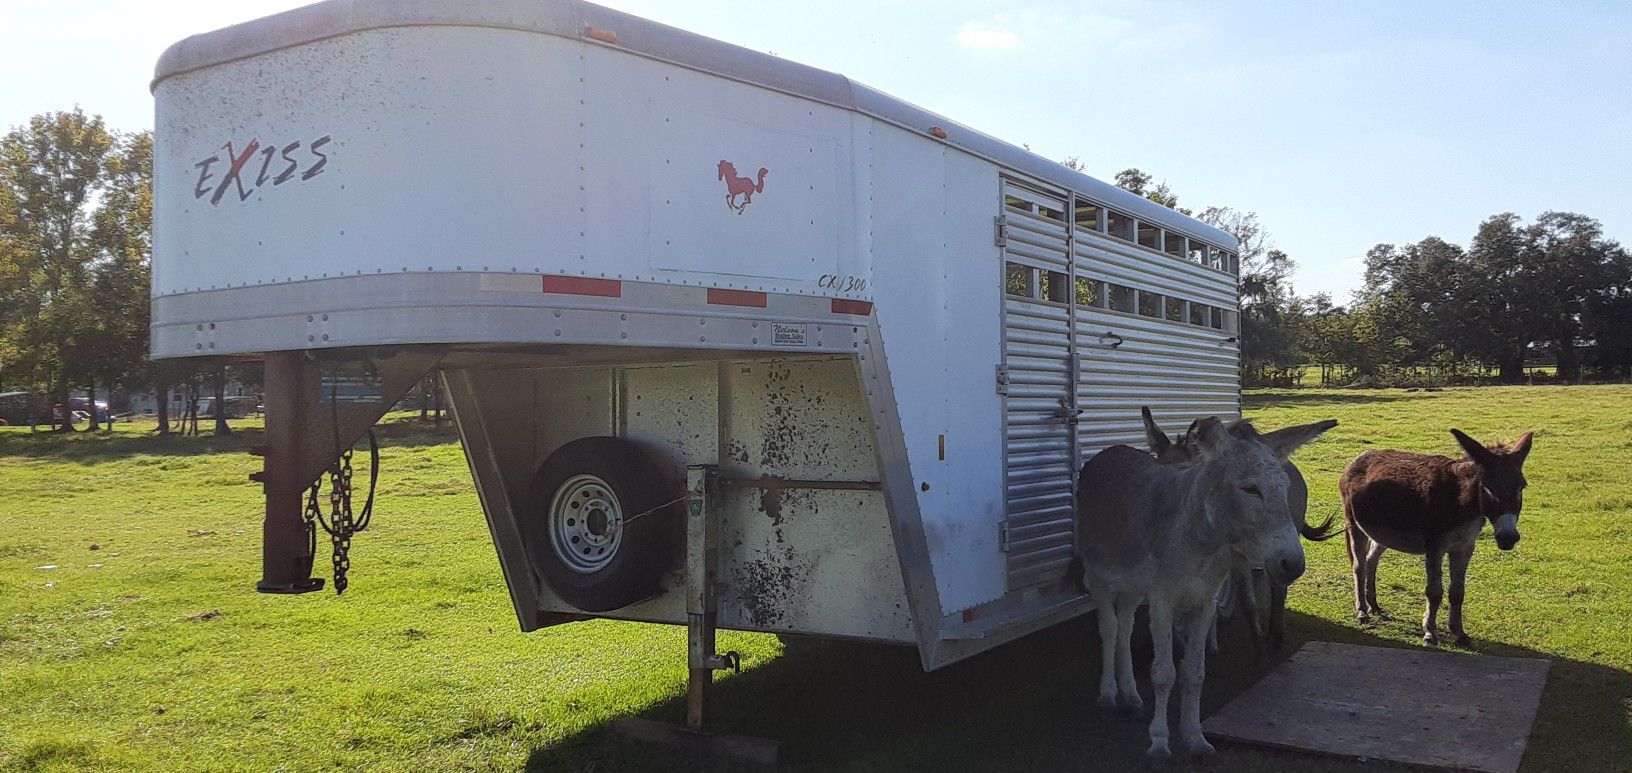 Exiss 3 horse slant horse trailer, stock combo with large tack room for sale.title in hand